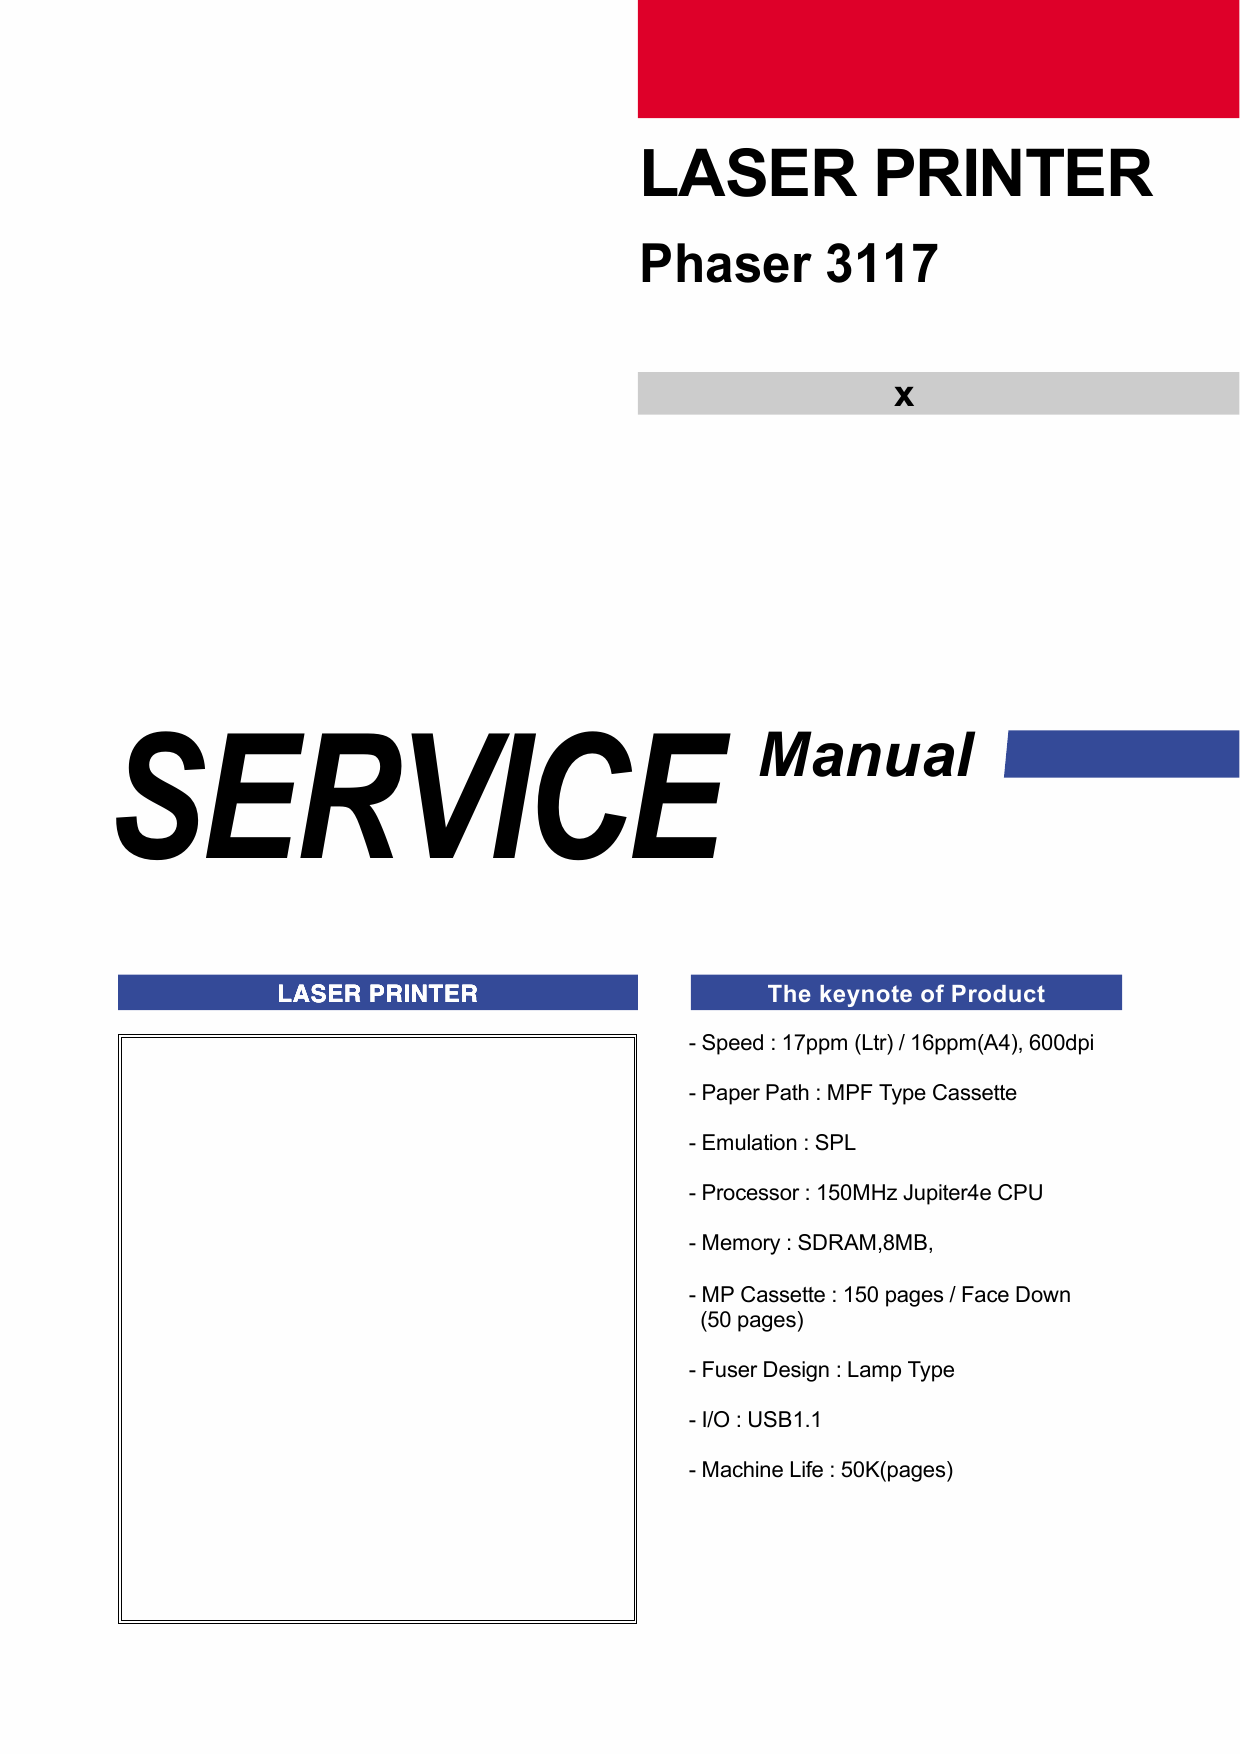 Xerox Phaser 3117 Parts List and Service Manual-1